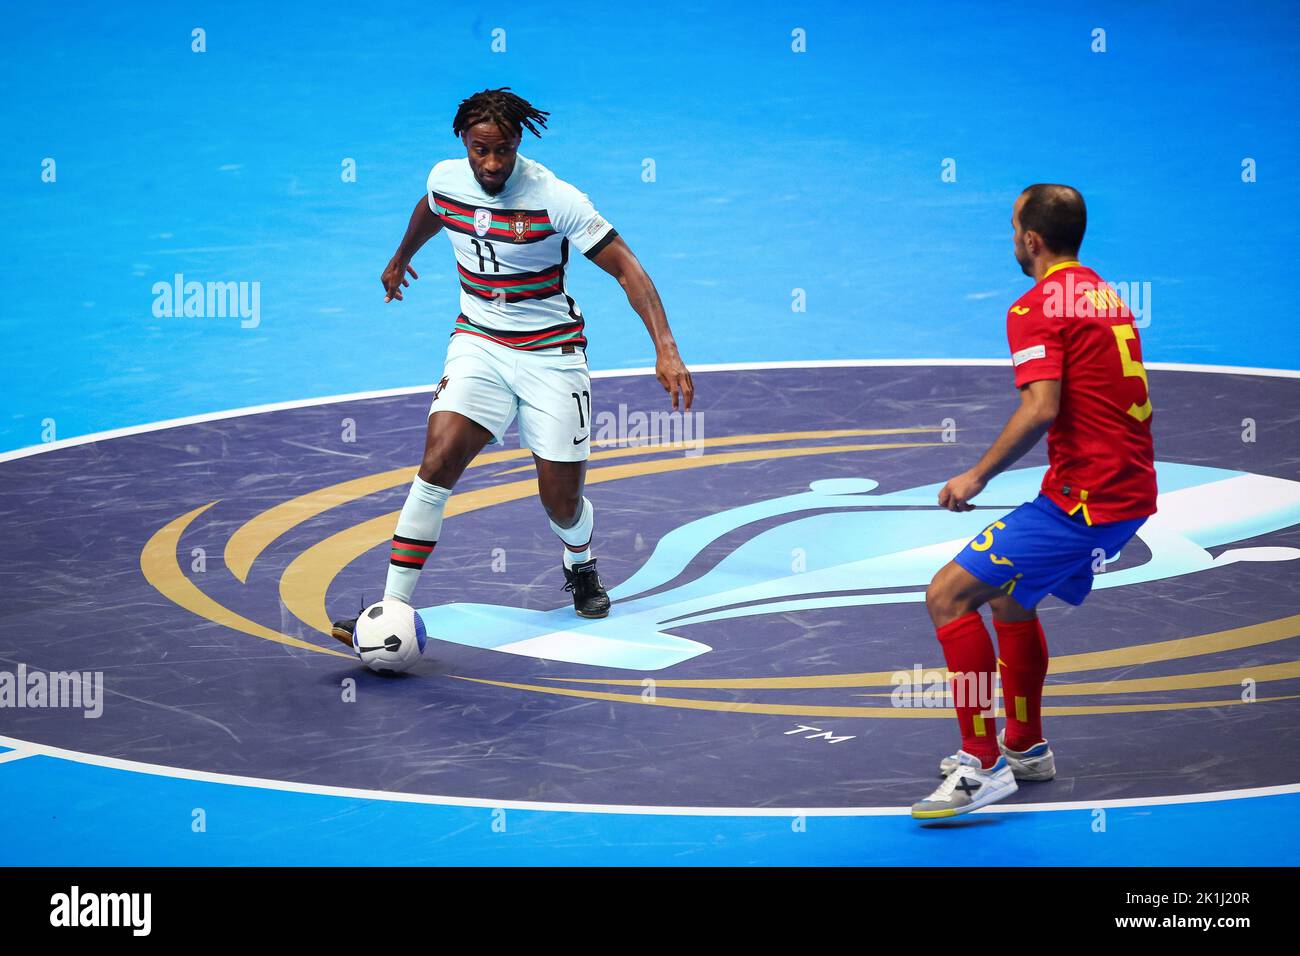 Buenos Aires, Argentina. 18th Sep, 2022. Pany Varela (L) of Portugal and Antonio Manuel Sanchez Tinda (R) of Espana seen in action during the final match between Portugal and Spain as part of Futsal Finallisima 2022 - Final Match at Parque Roca Stadium.(Final score: Portugal 4:2 Spain) Credit: SOPA Images Limited/Alamy Live News Stock Photo